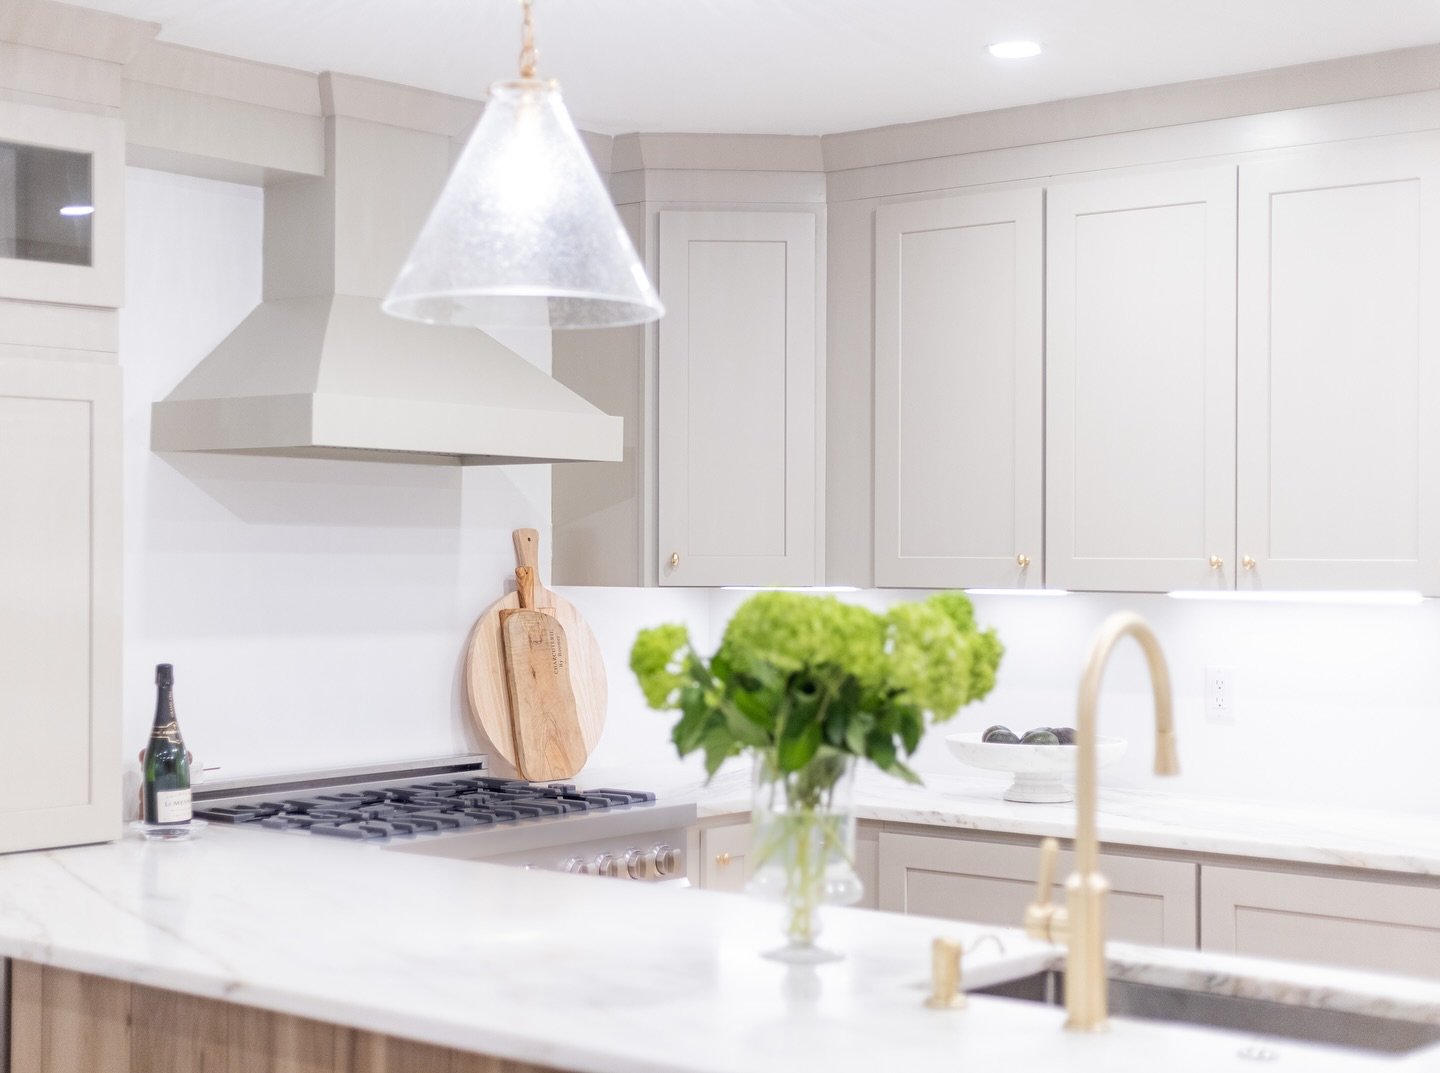 In this South End kitchen, we decided to extend the cabinet finish to the hood, to keep the aesthetic soft and inviting 🤍🤍